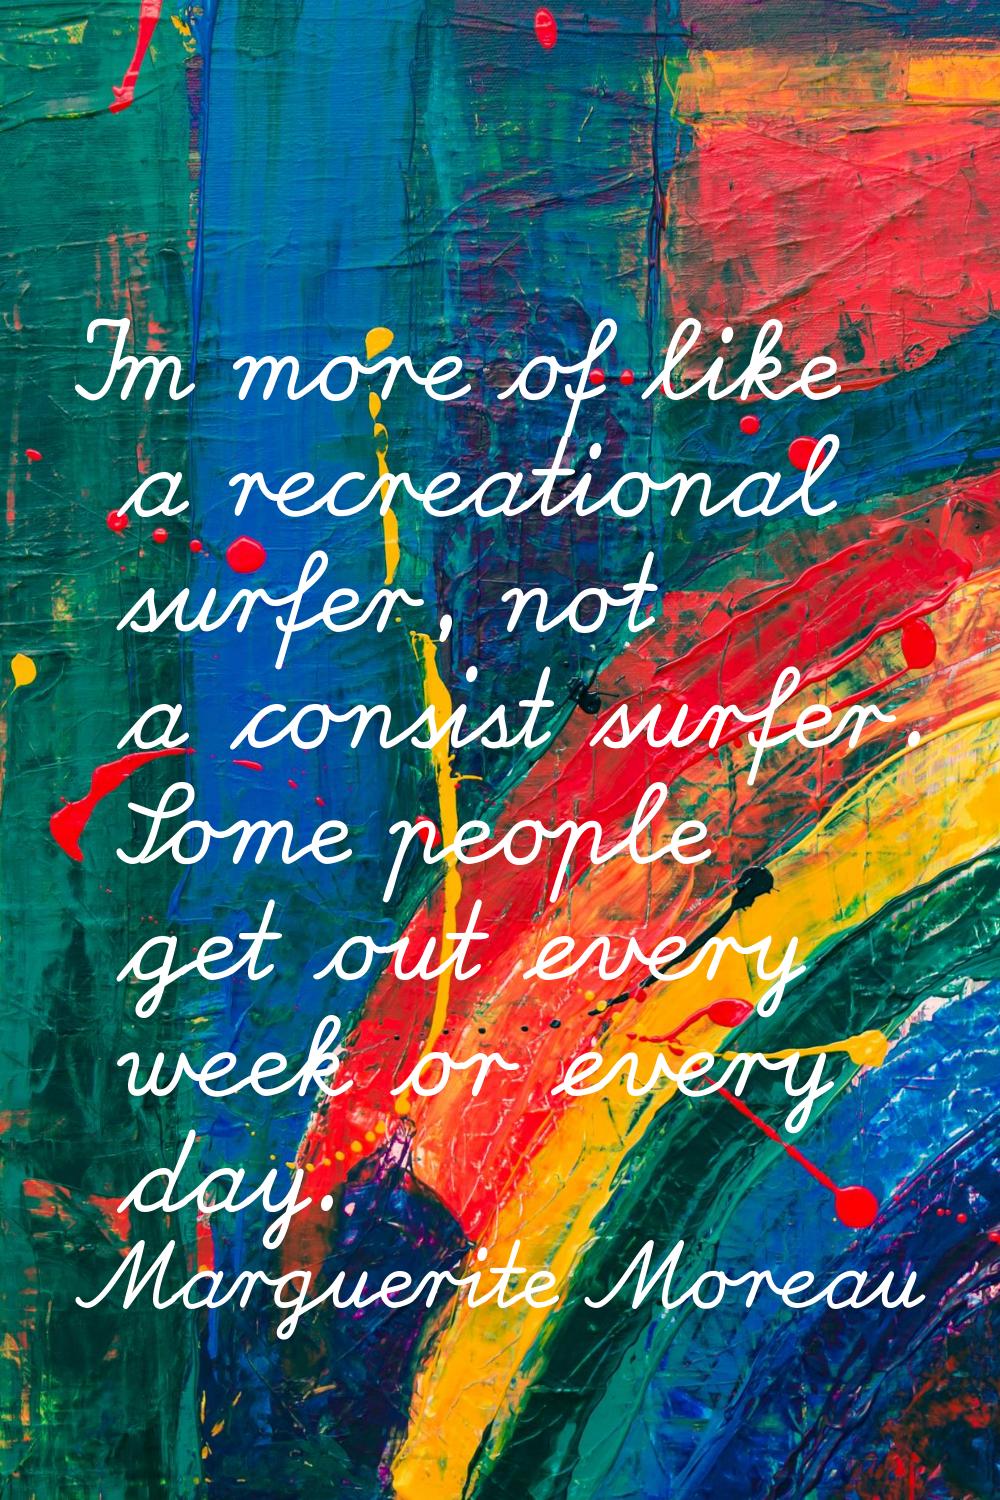 I'm more of like a recreational surfer, not a consist surfer. Some people get out every week or eve